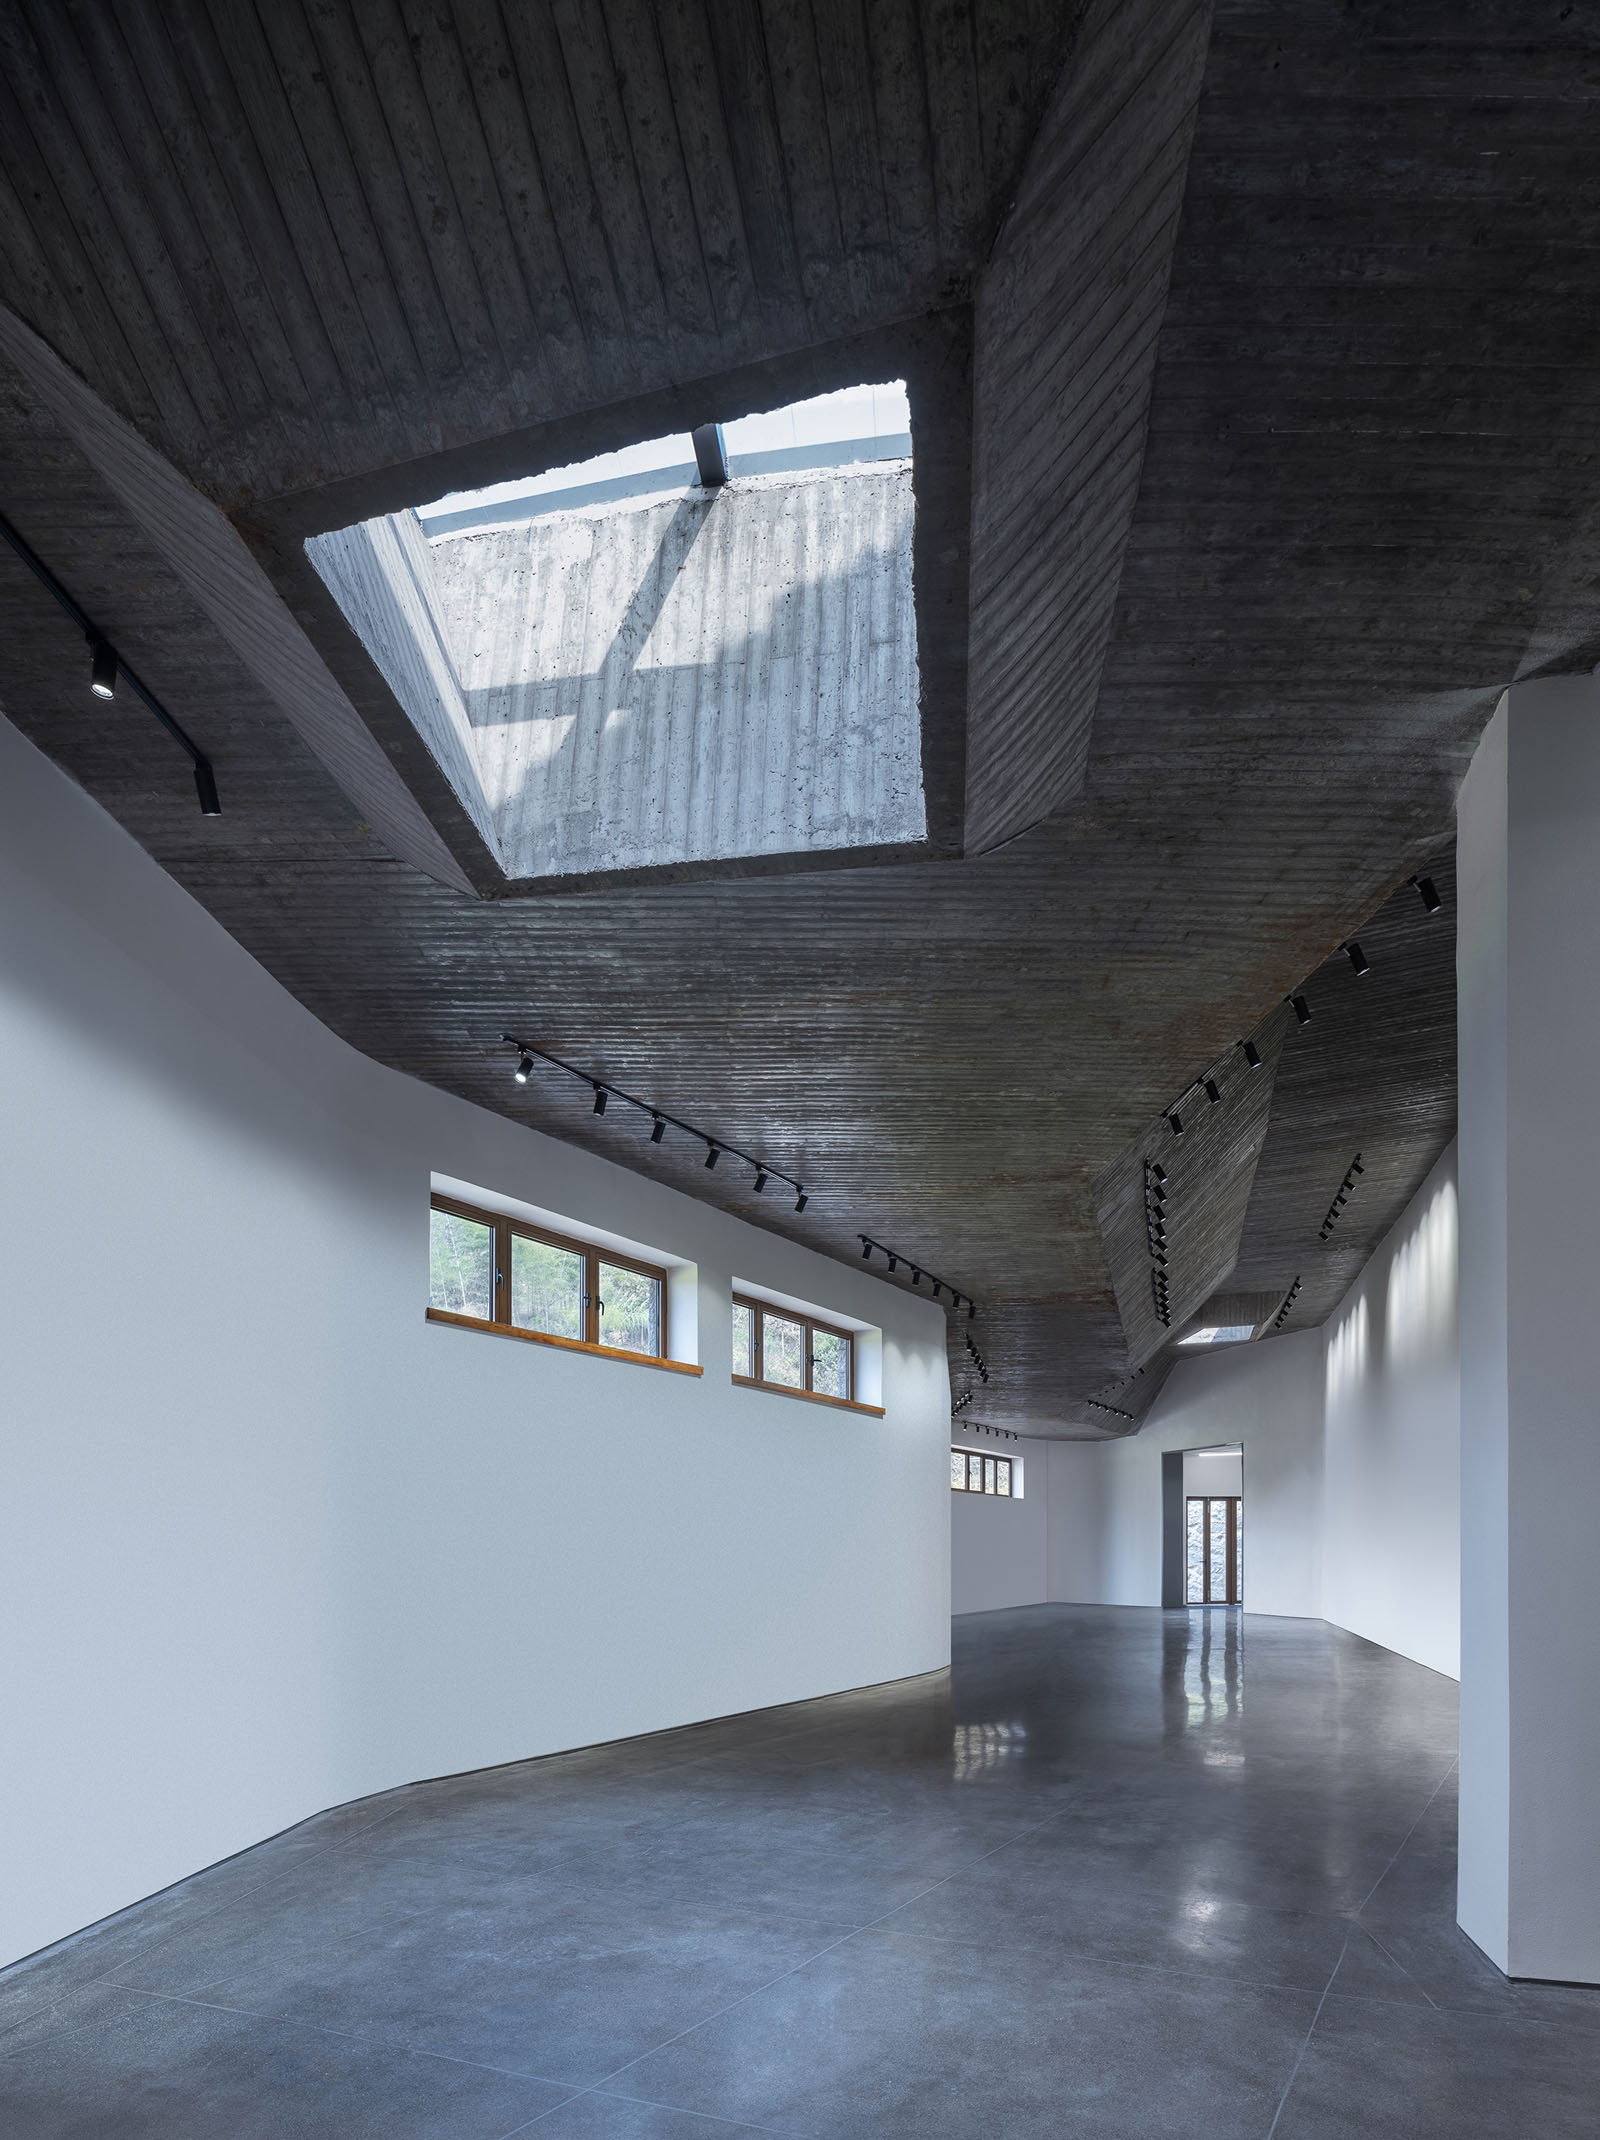 Image of 20221206 UAD QingxiMuseum ZYStudio 2 in Qingxi Culture and History Museum - Cosentino